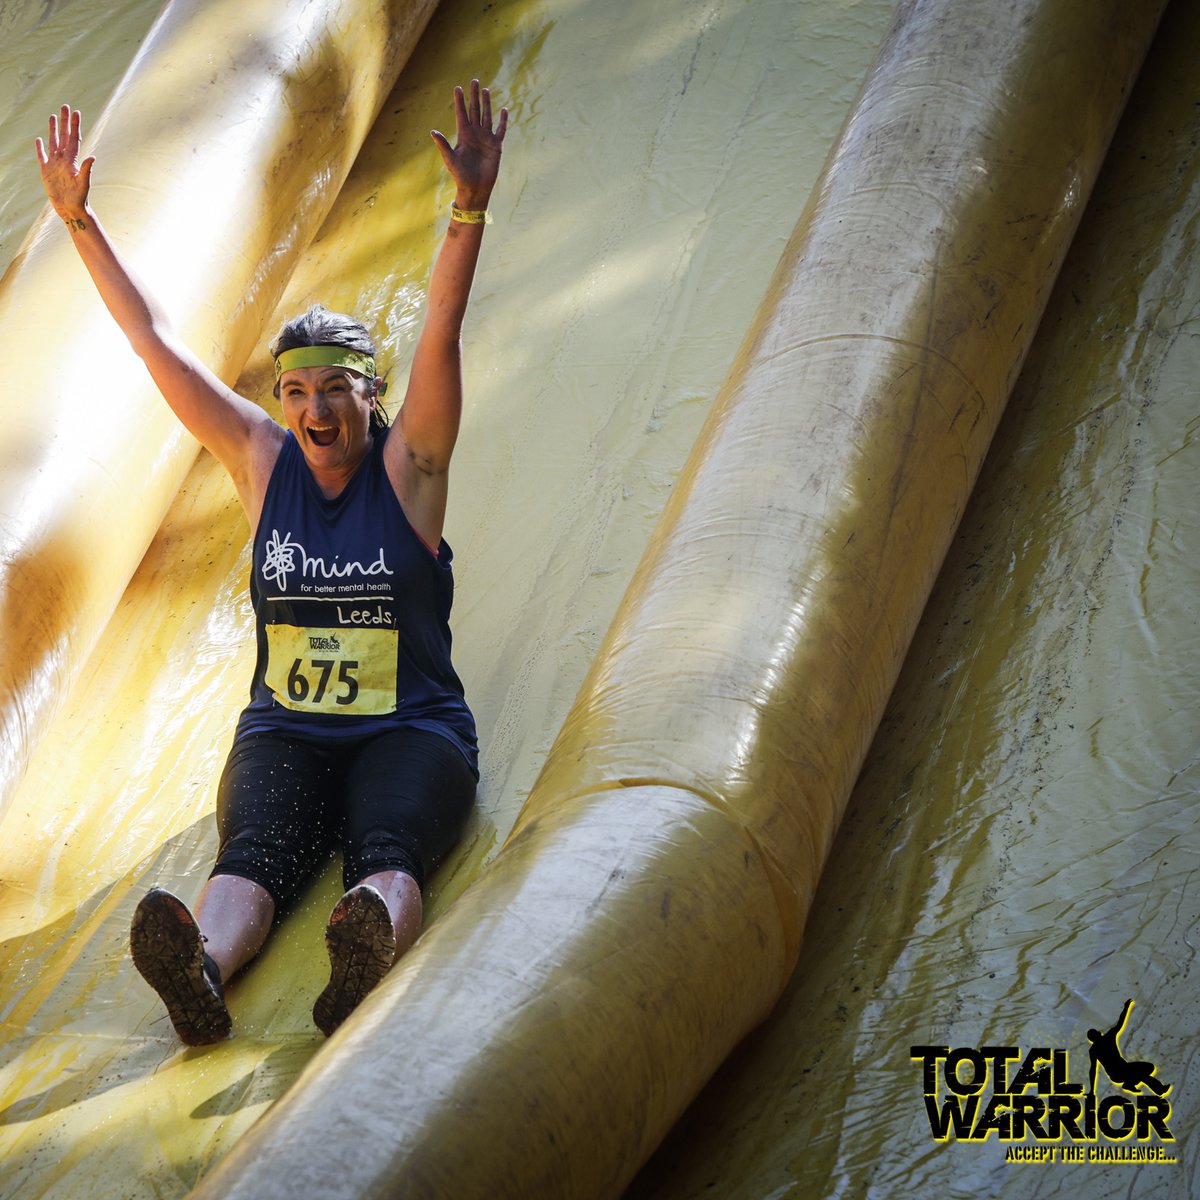 Scream if you want to be muddier! Total Warrior is on Saturday 22nd and Sunday 23rd of June, and we're looking for some brave souls to take on the muddiest obstacle race in Leeds! lght.ly/fm90114